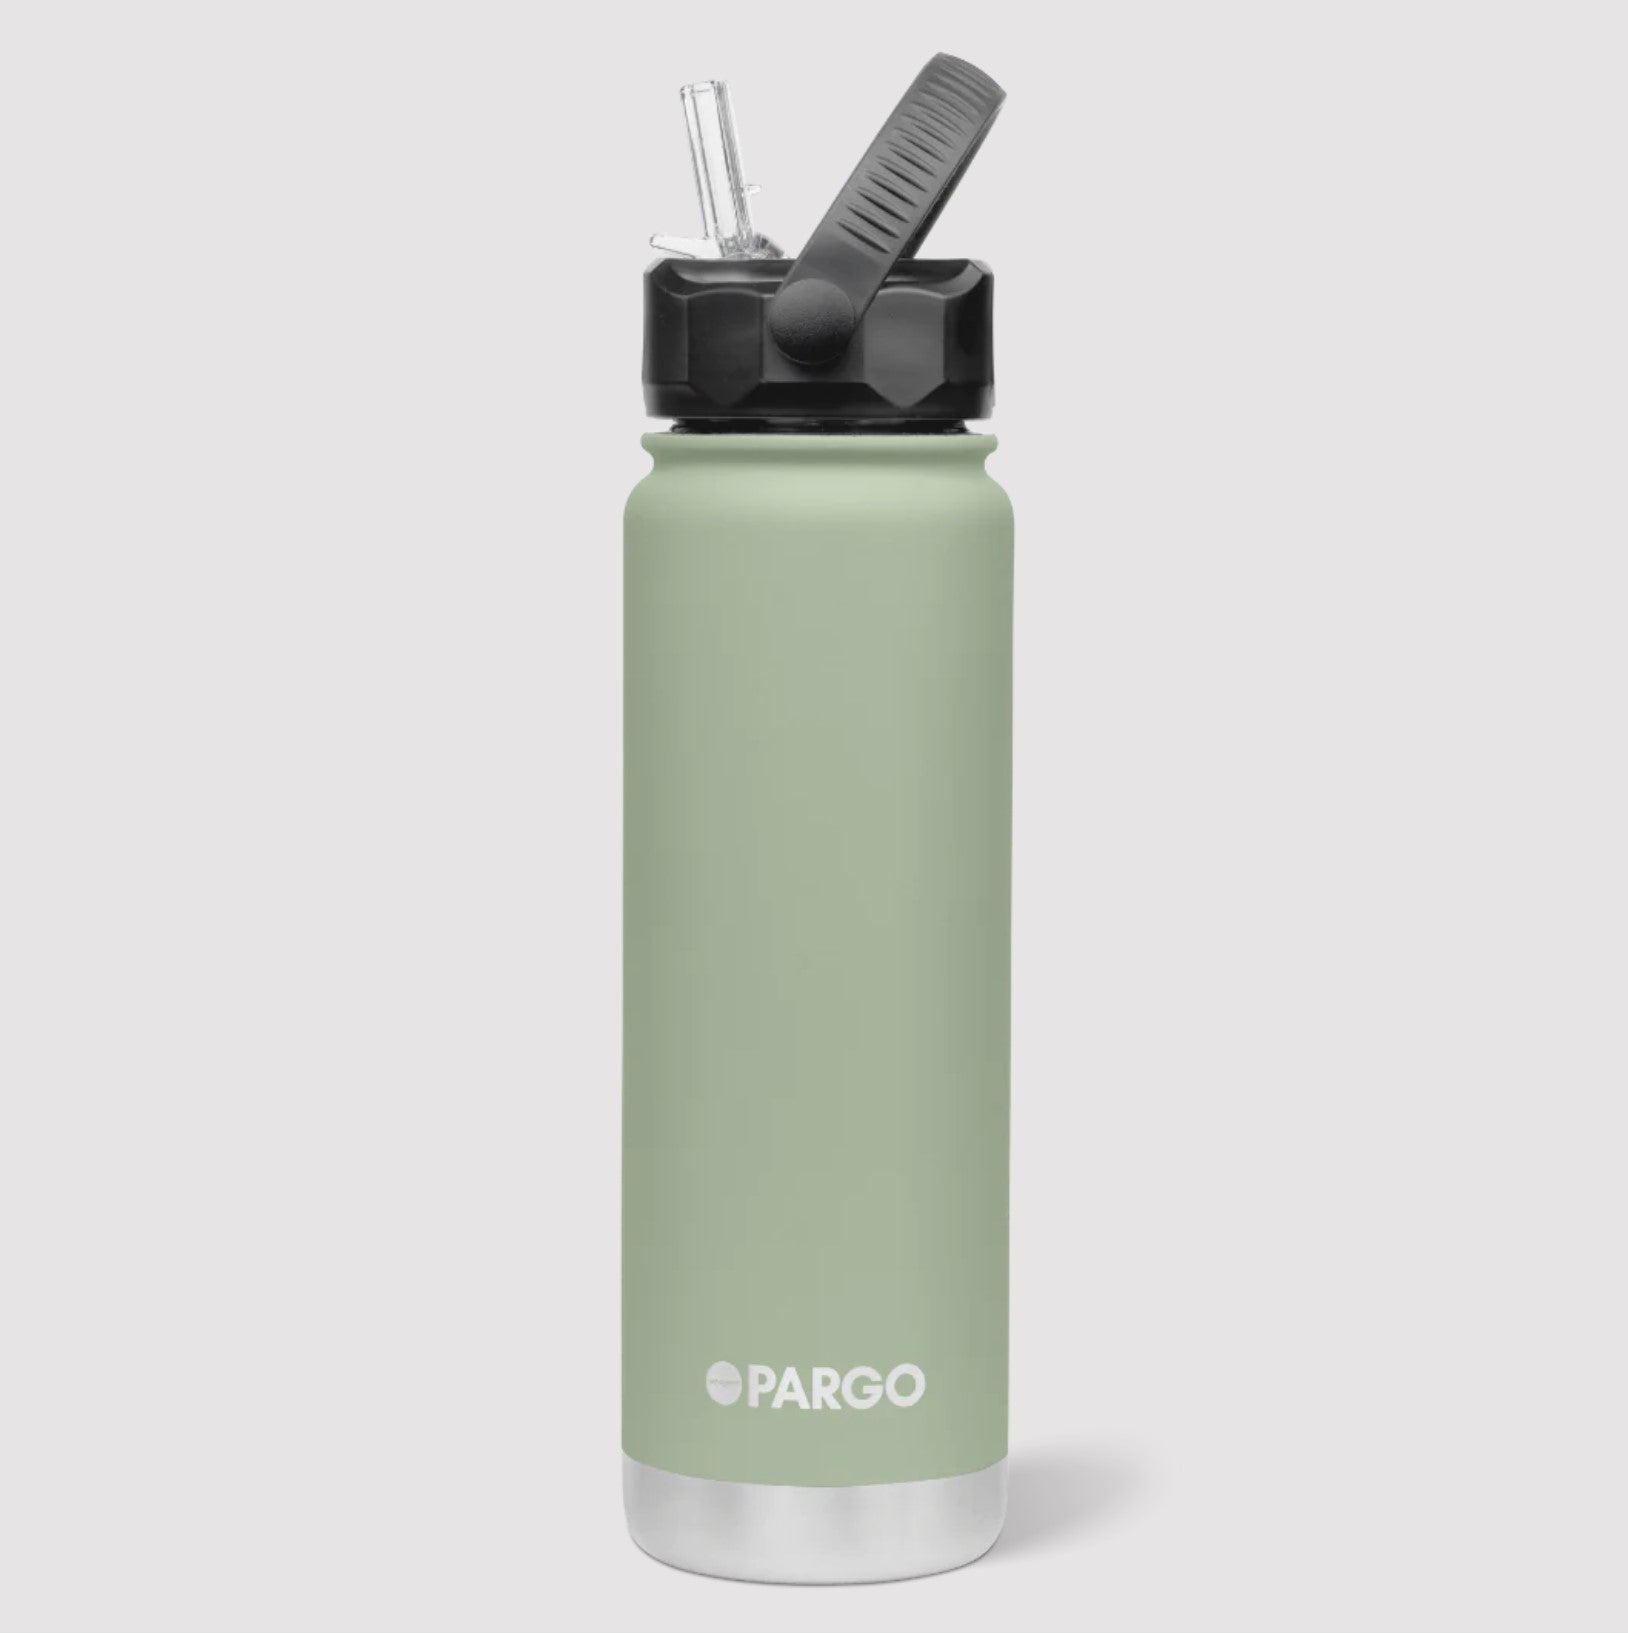 Project Pargo Insulated Bottle with Straw 750ml - Eucalypt Green